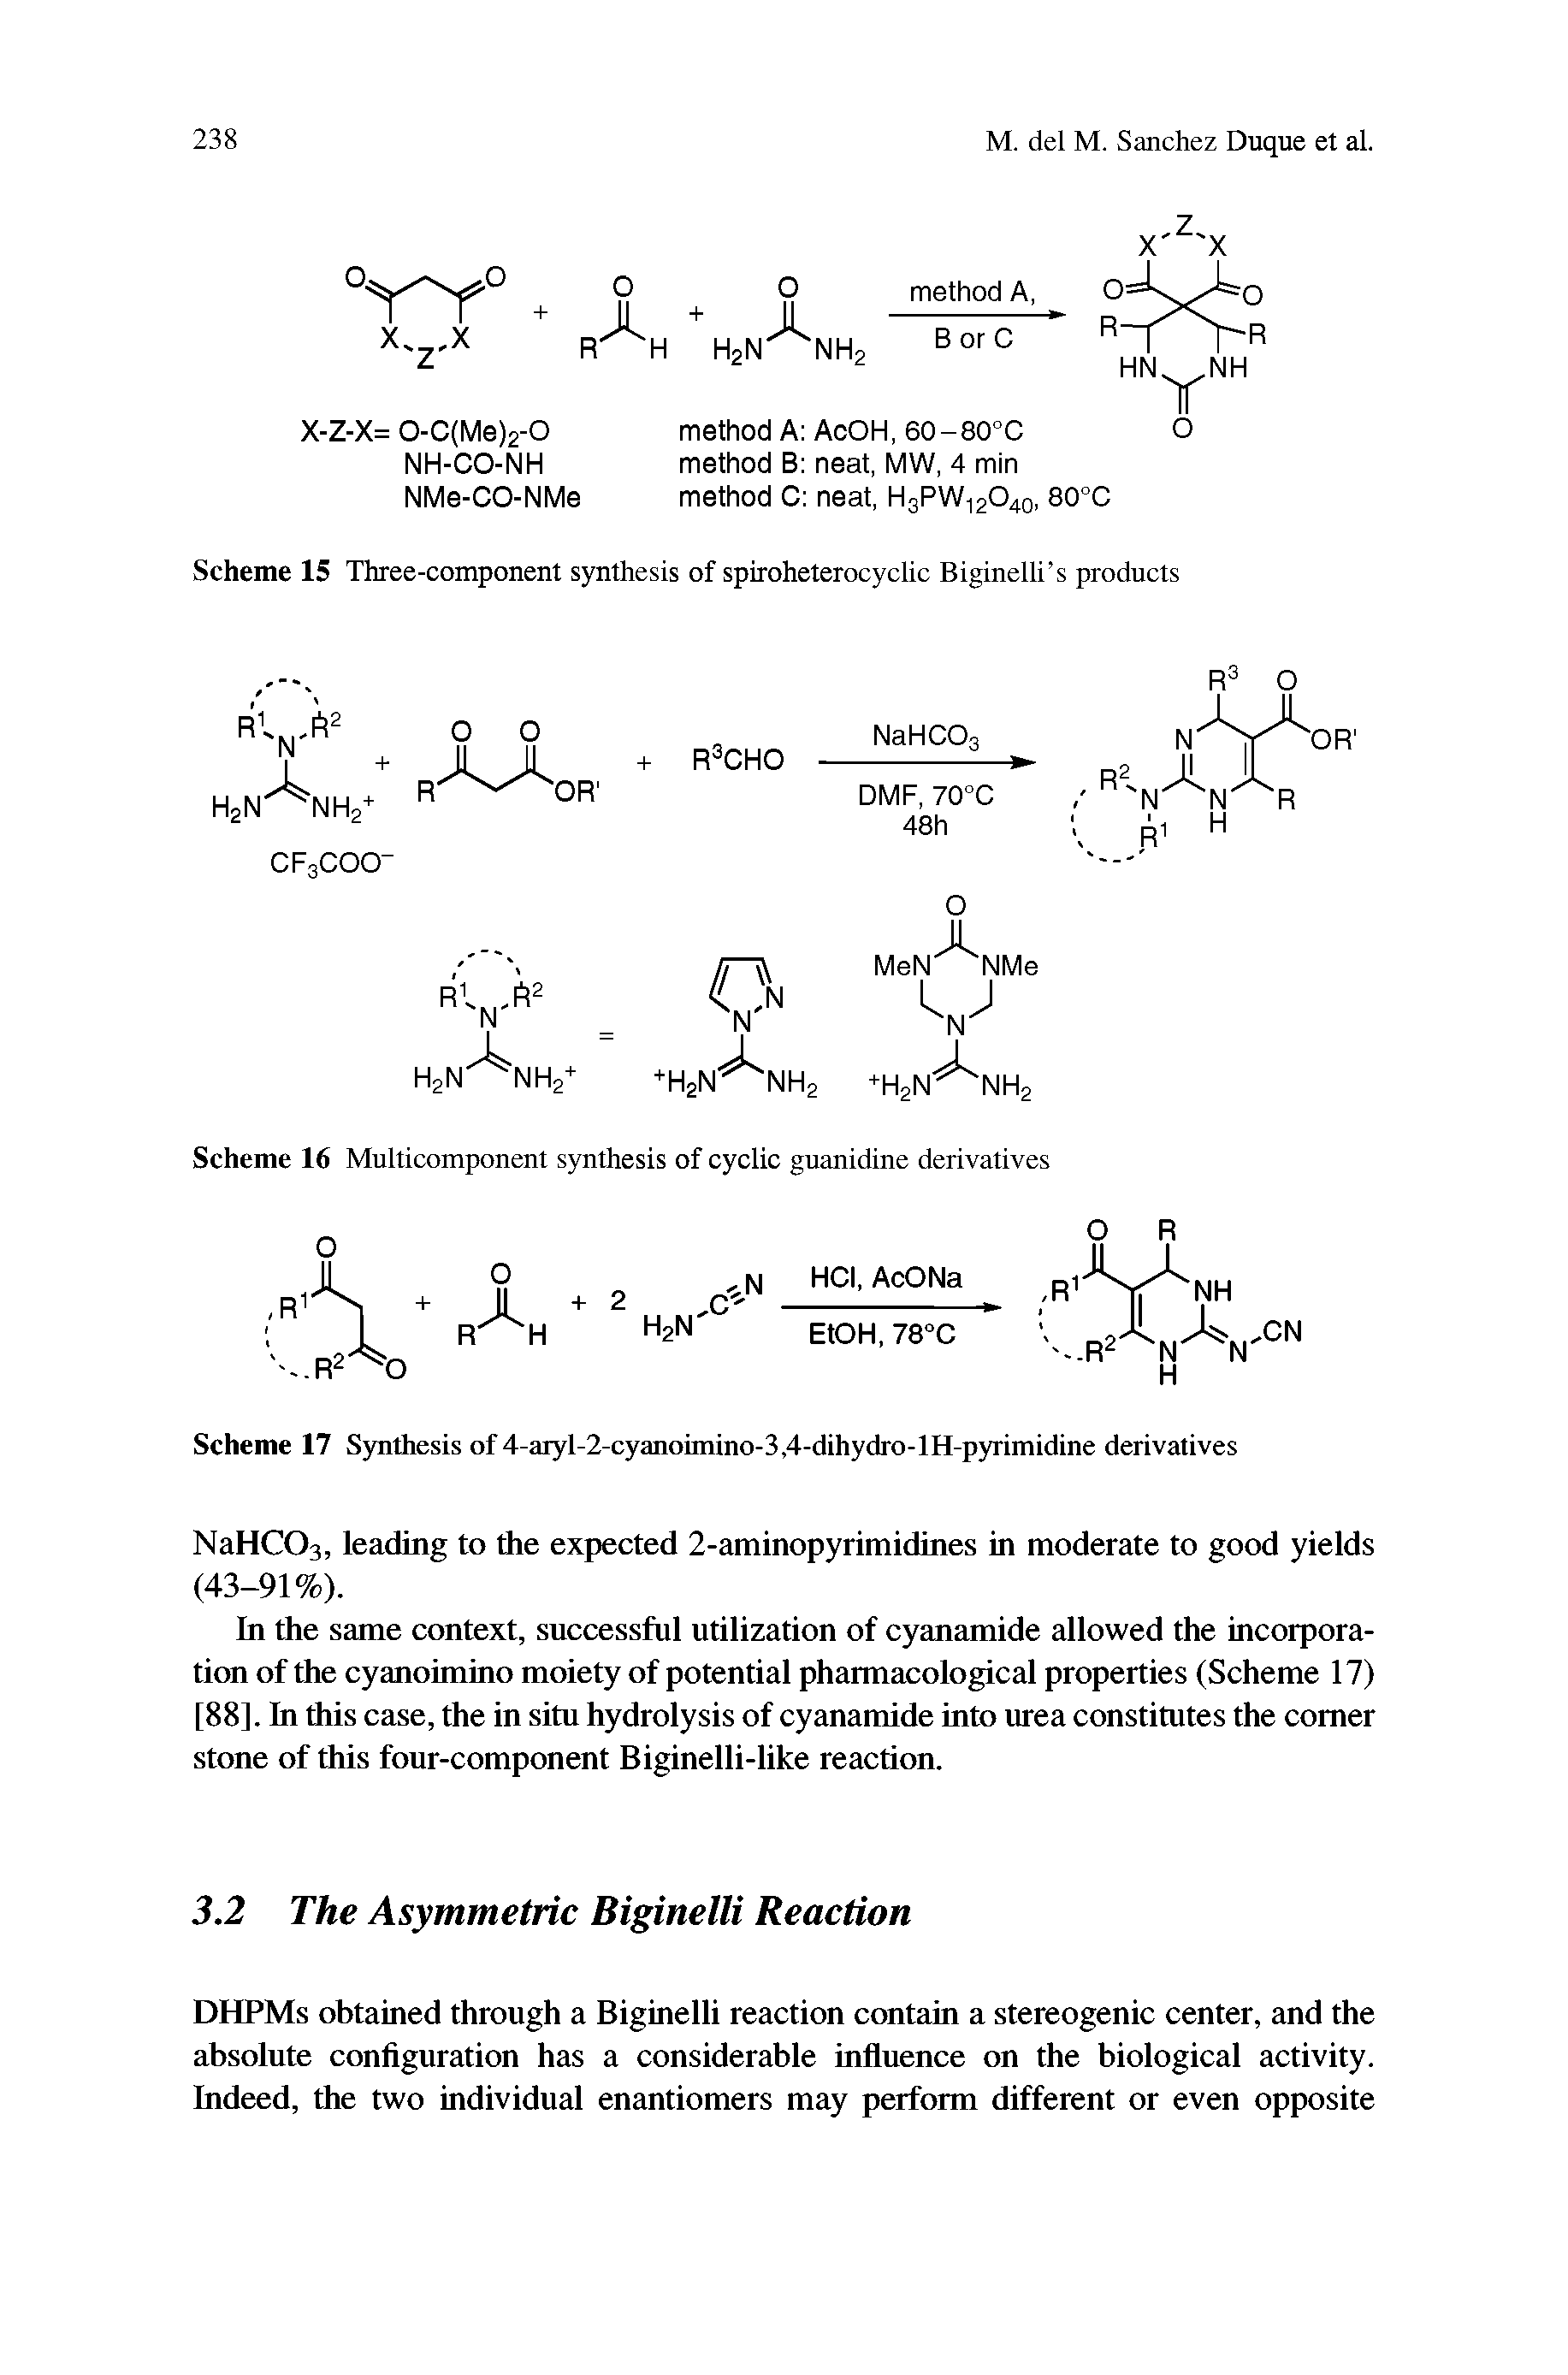 Scheme 16 Multicomponent synthesis of cyclic guanidine derivatives...